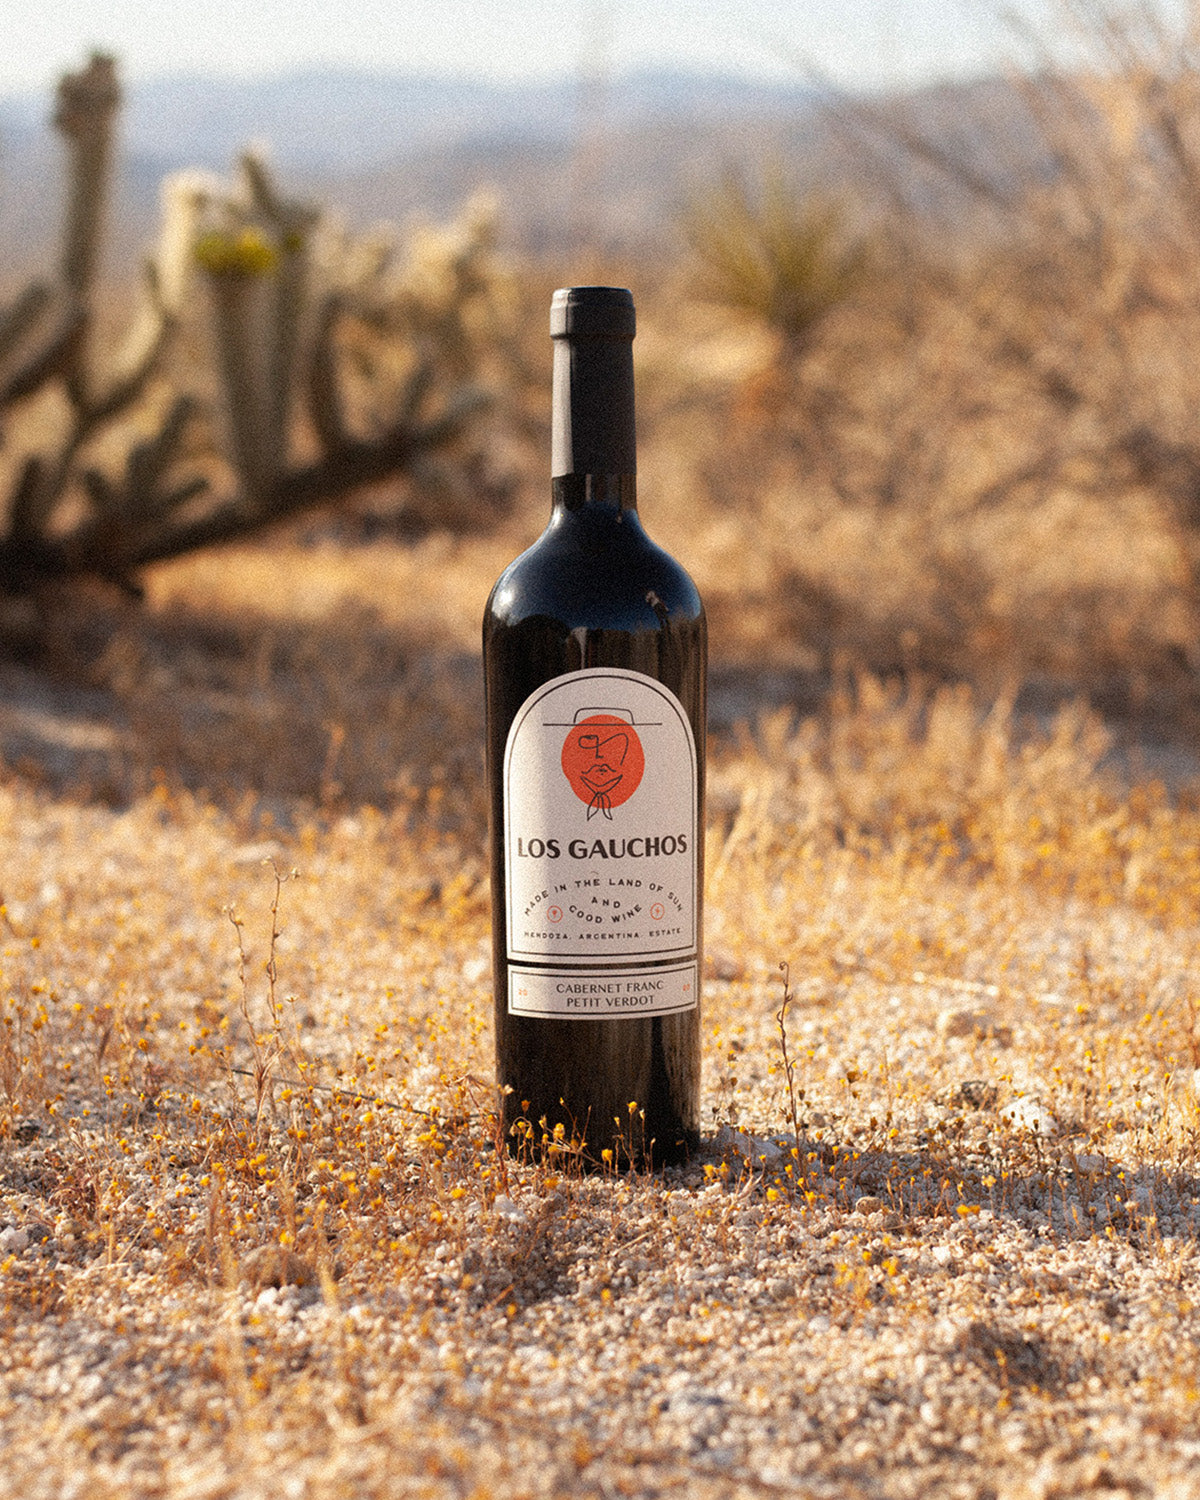 Featured product image displaying Los Gaucho's Cabernet Franc - Petit Verdot